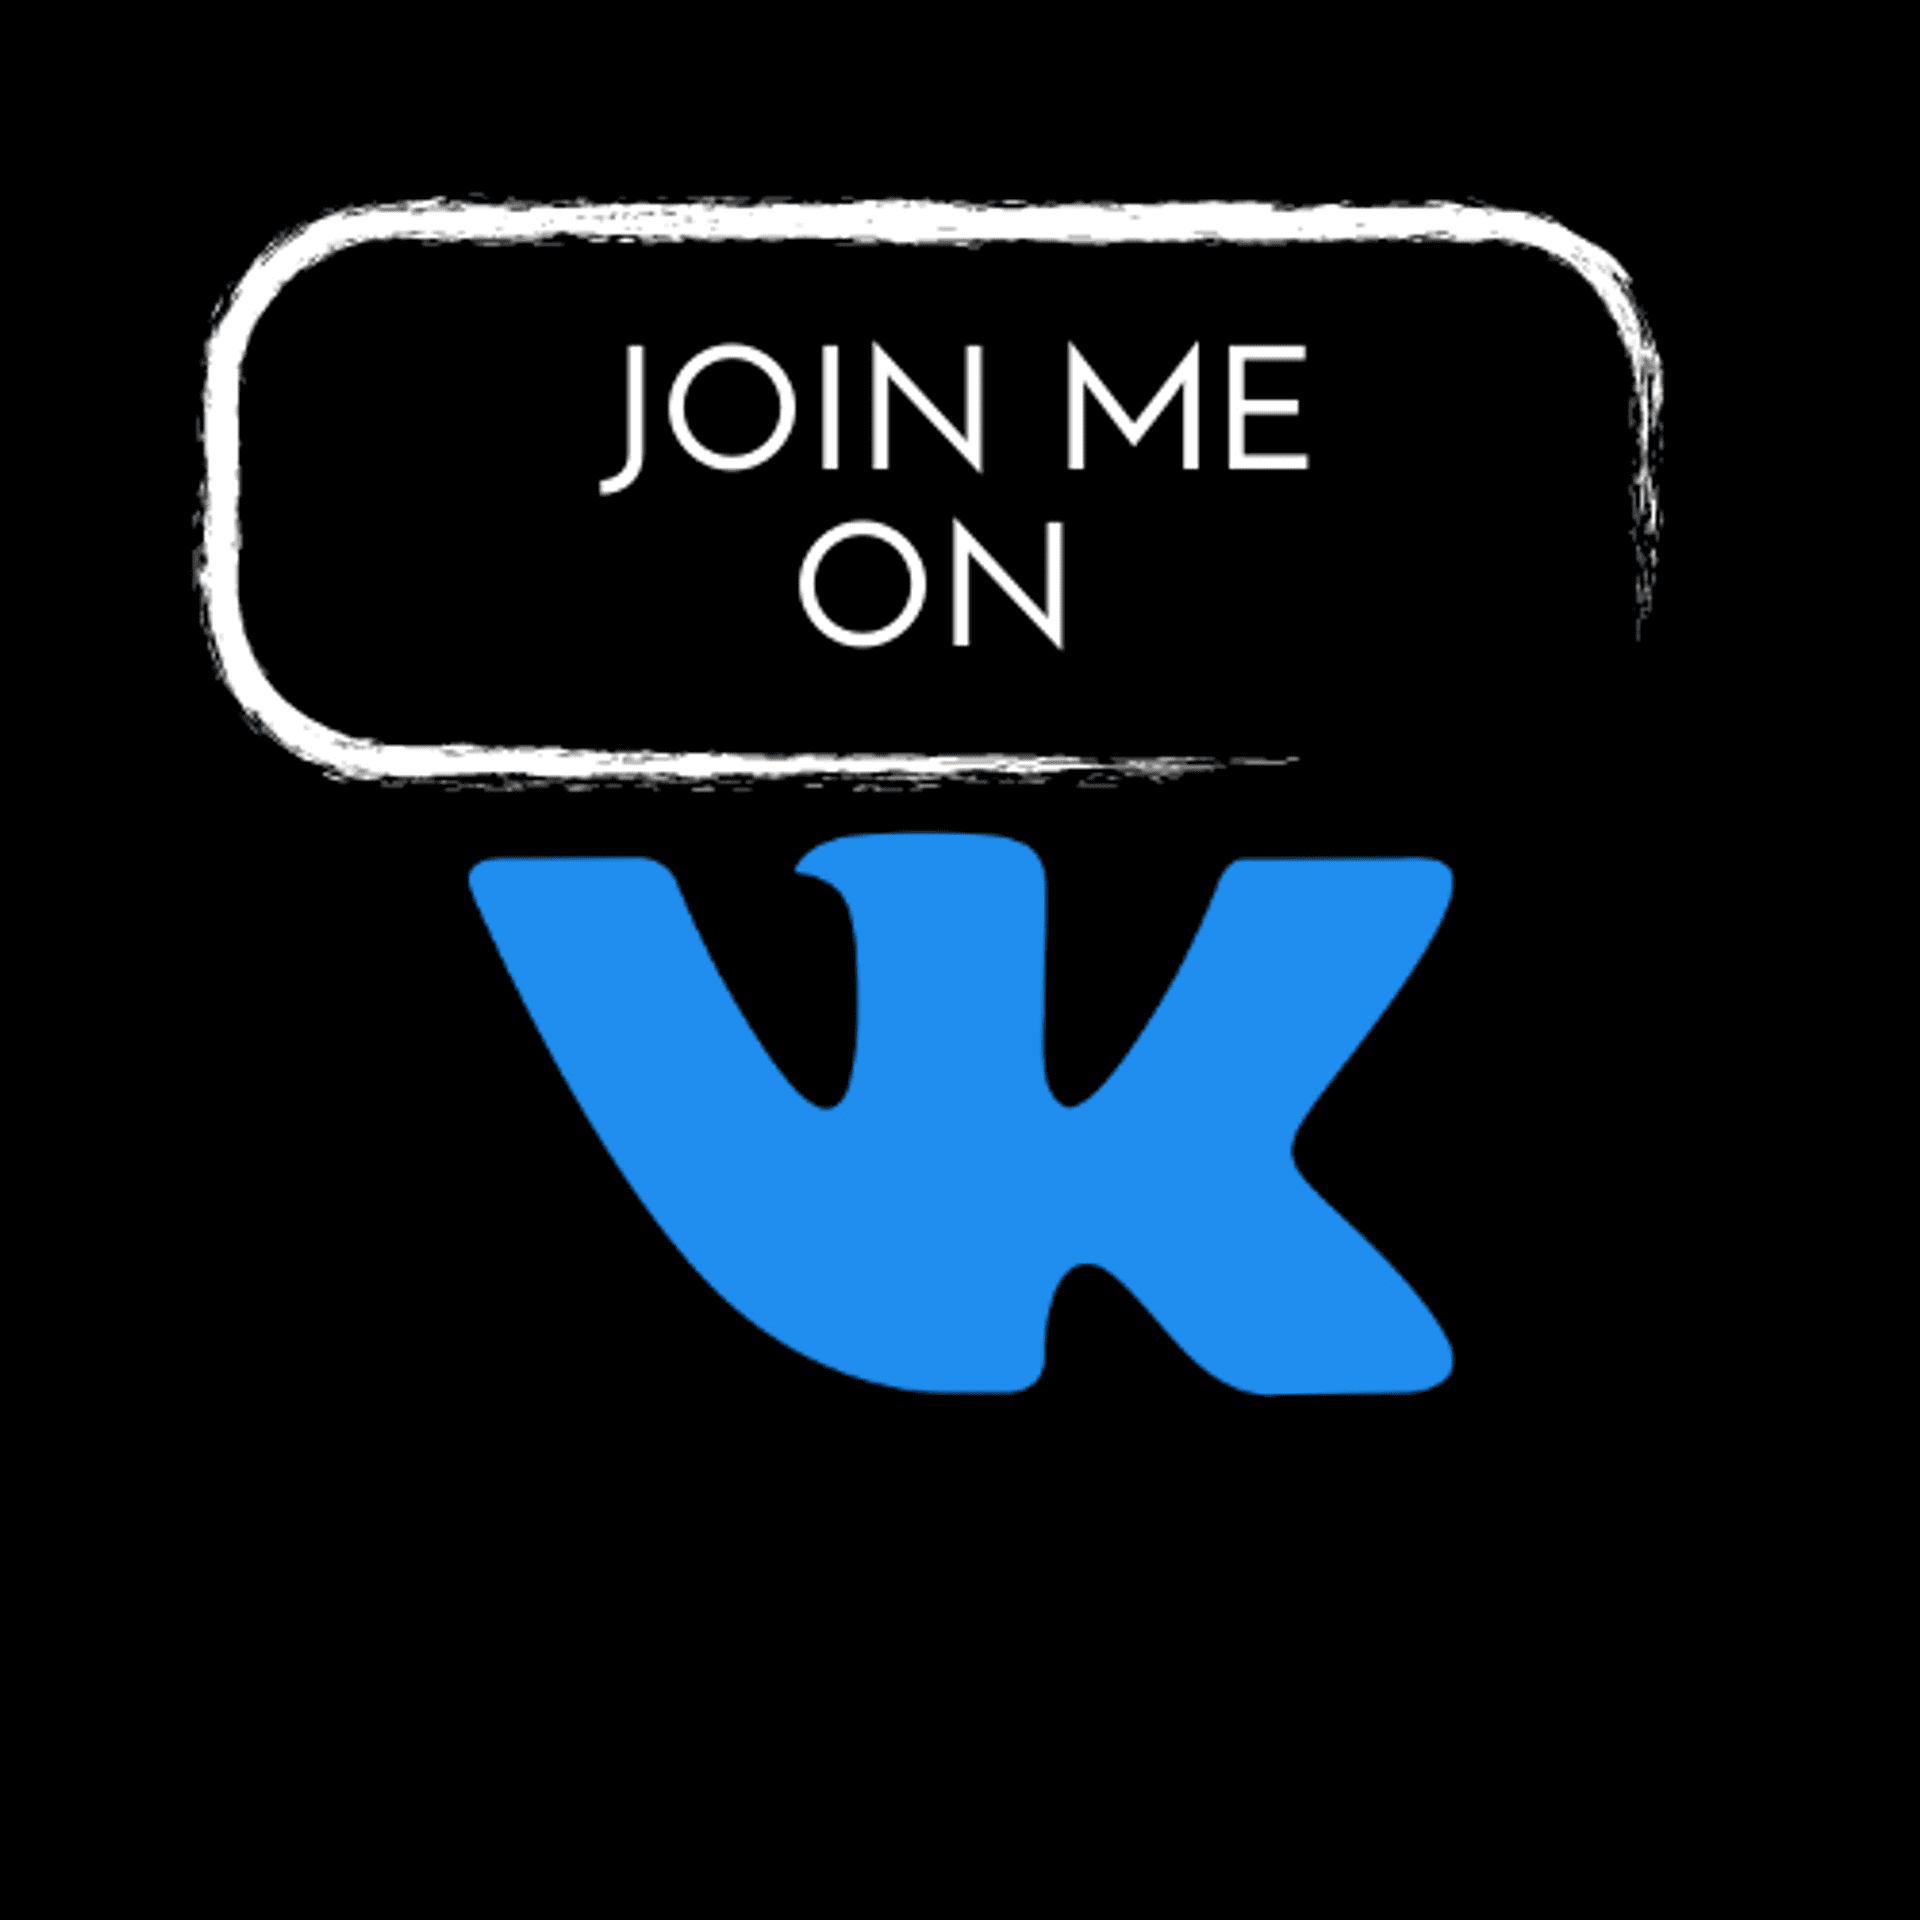 join me on vk